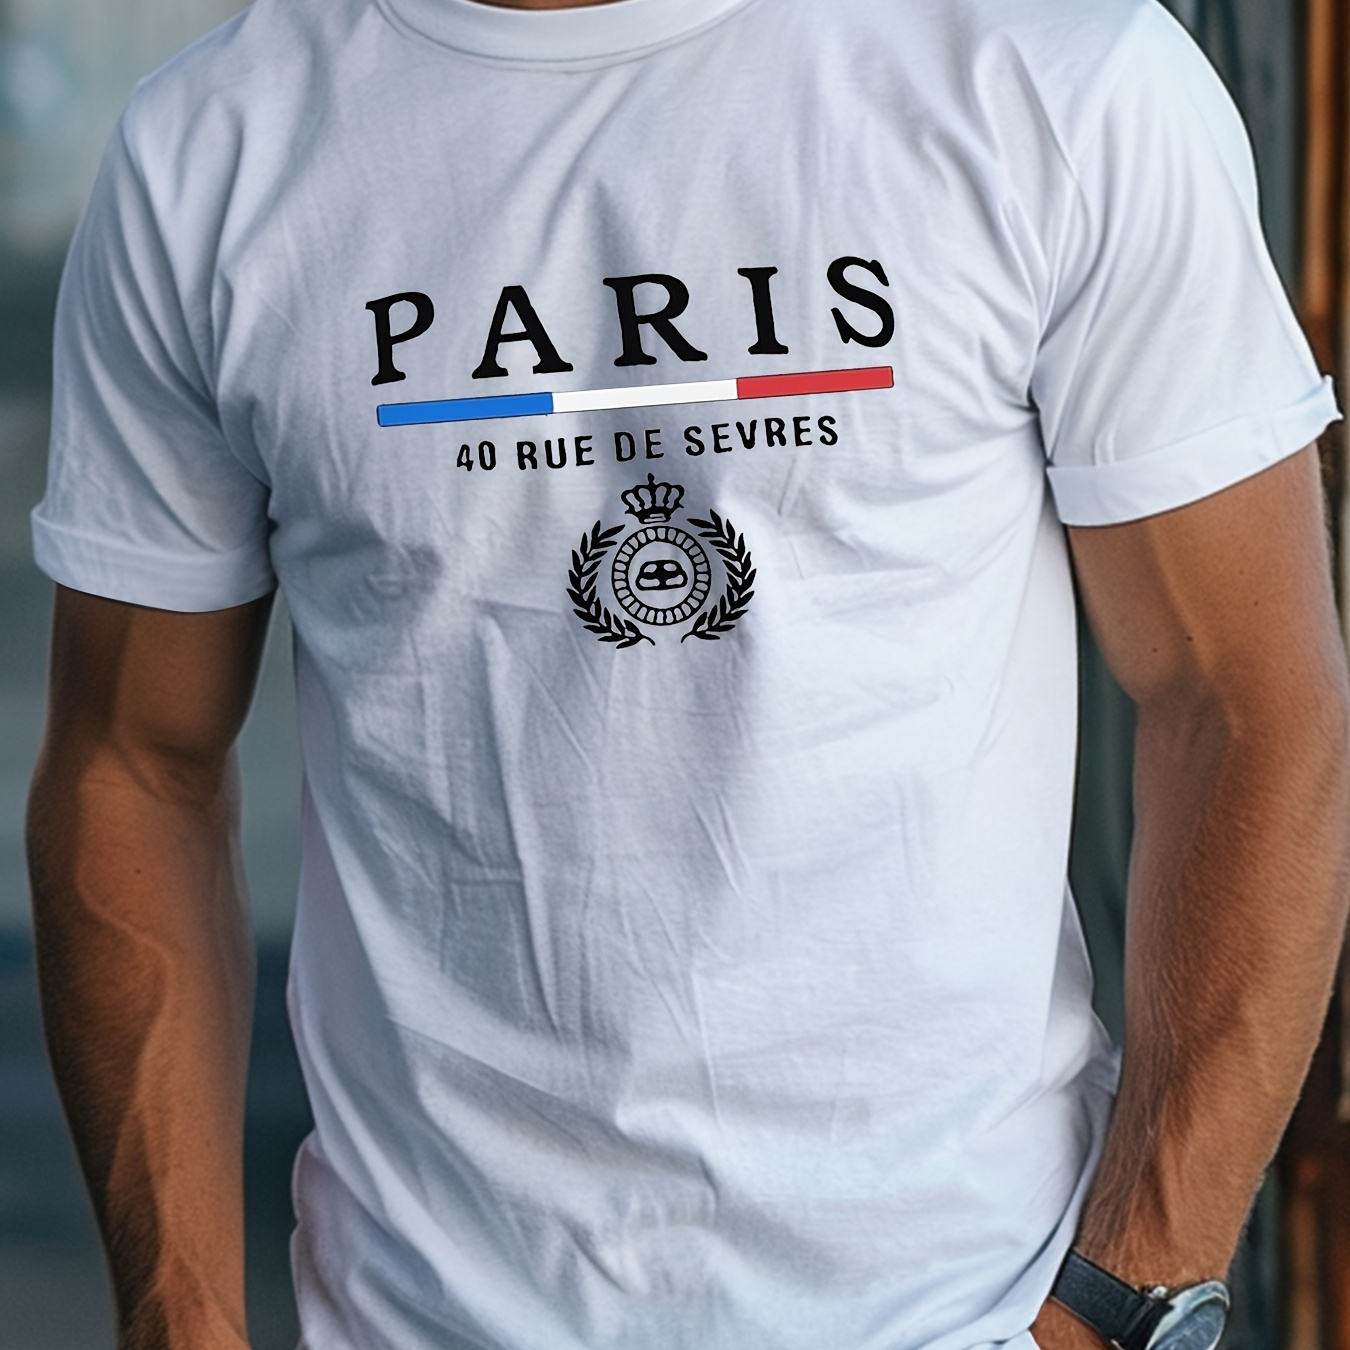 

Paris Psris Printed Summer Short-sleeved 220g Pure Cotton T-shirt Regular For Both Men And Women, Can Be Paired With Couples Combed Cotton T-shirt